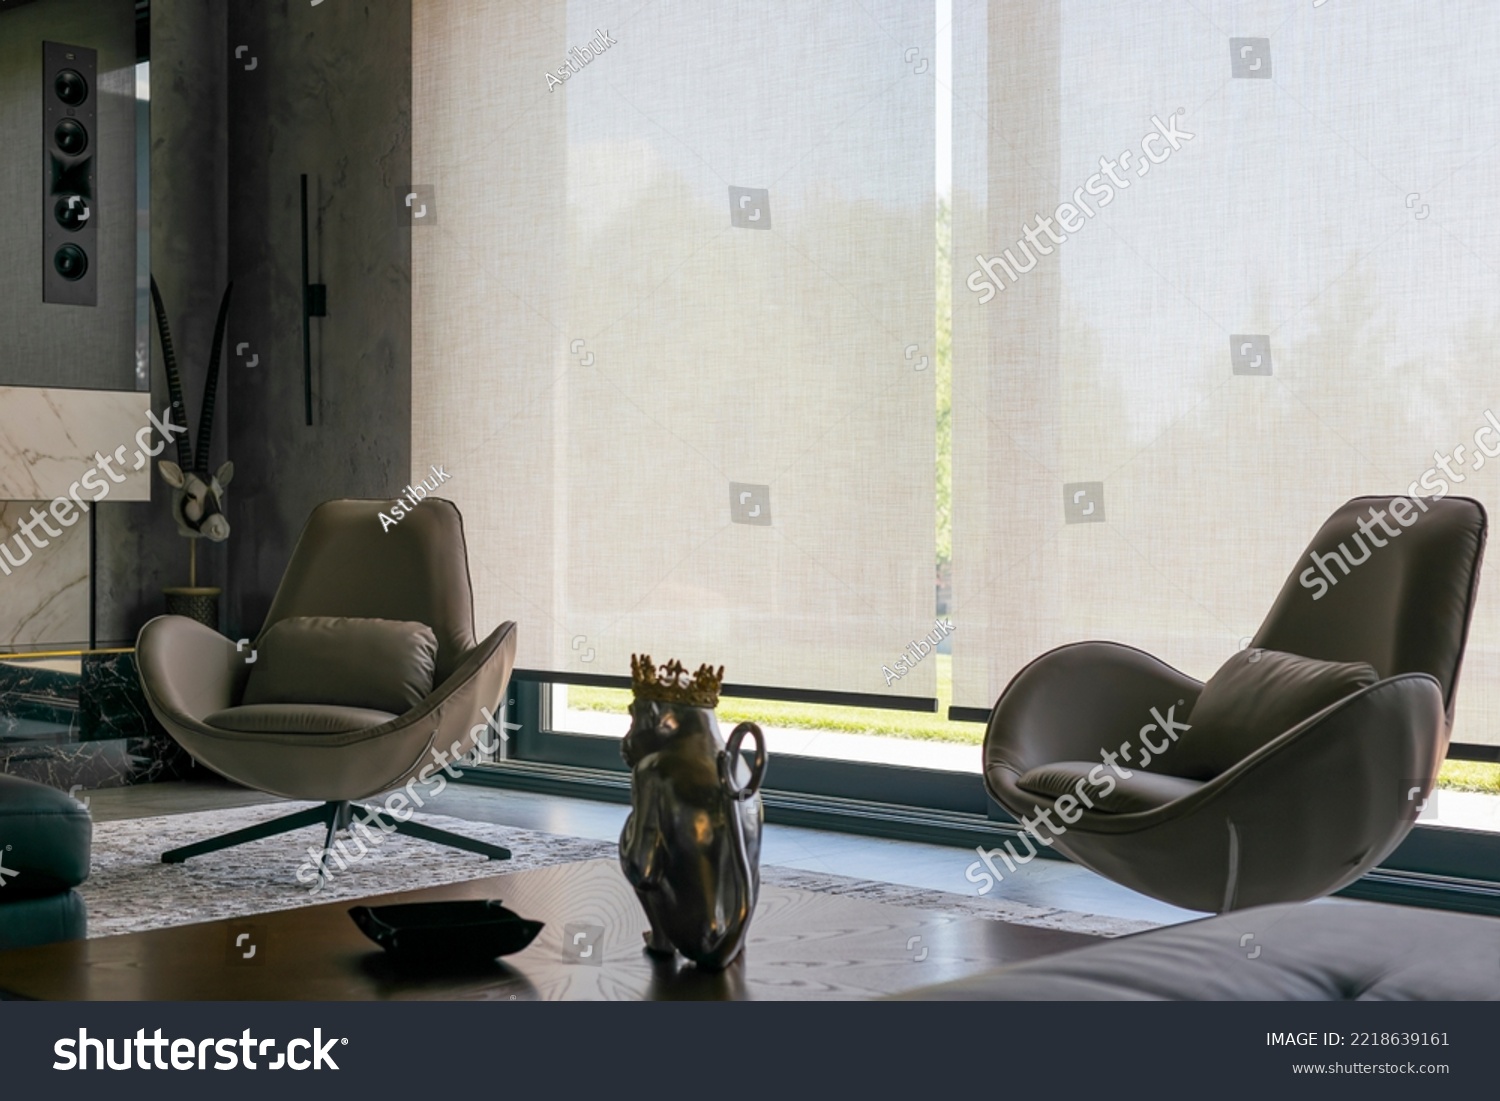 Interior design with roller blinds in the background. Automatic solar shades of large sizes on the window. Fabric with linen texture. In front of a large window is a chair on a carpet.  #2218639161